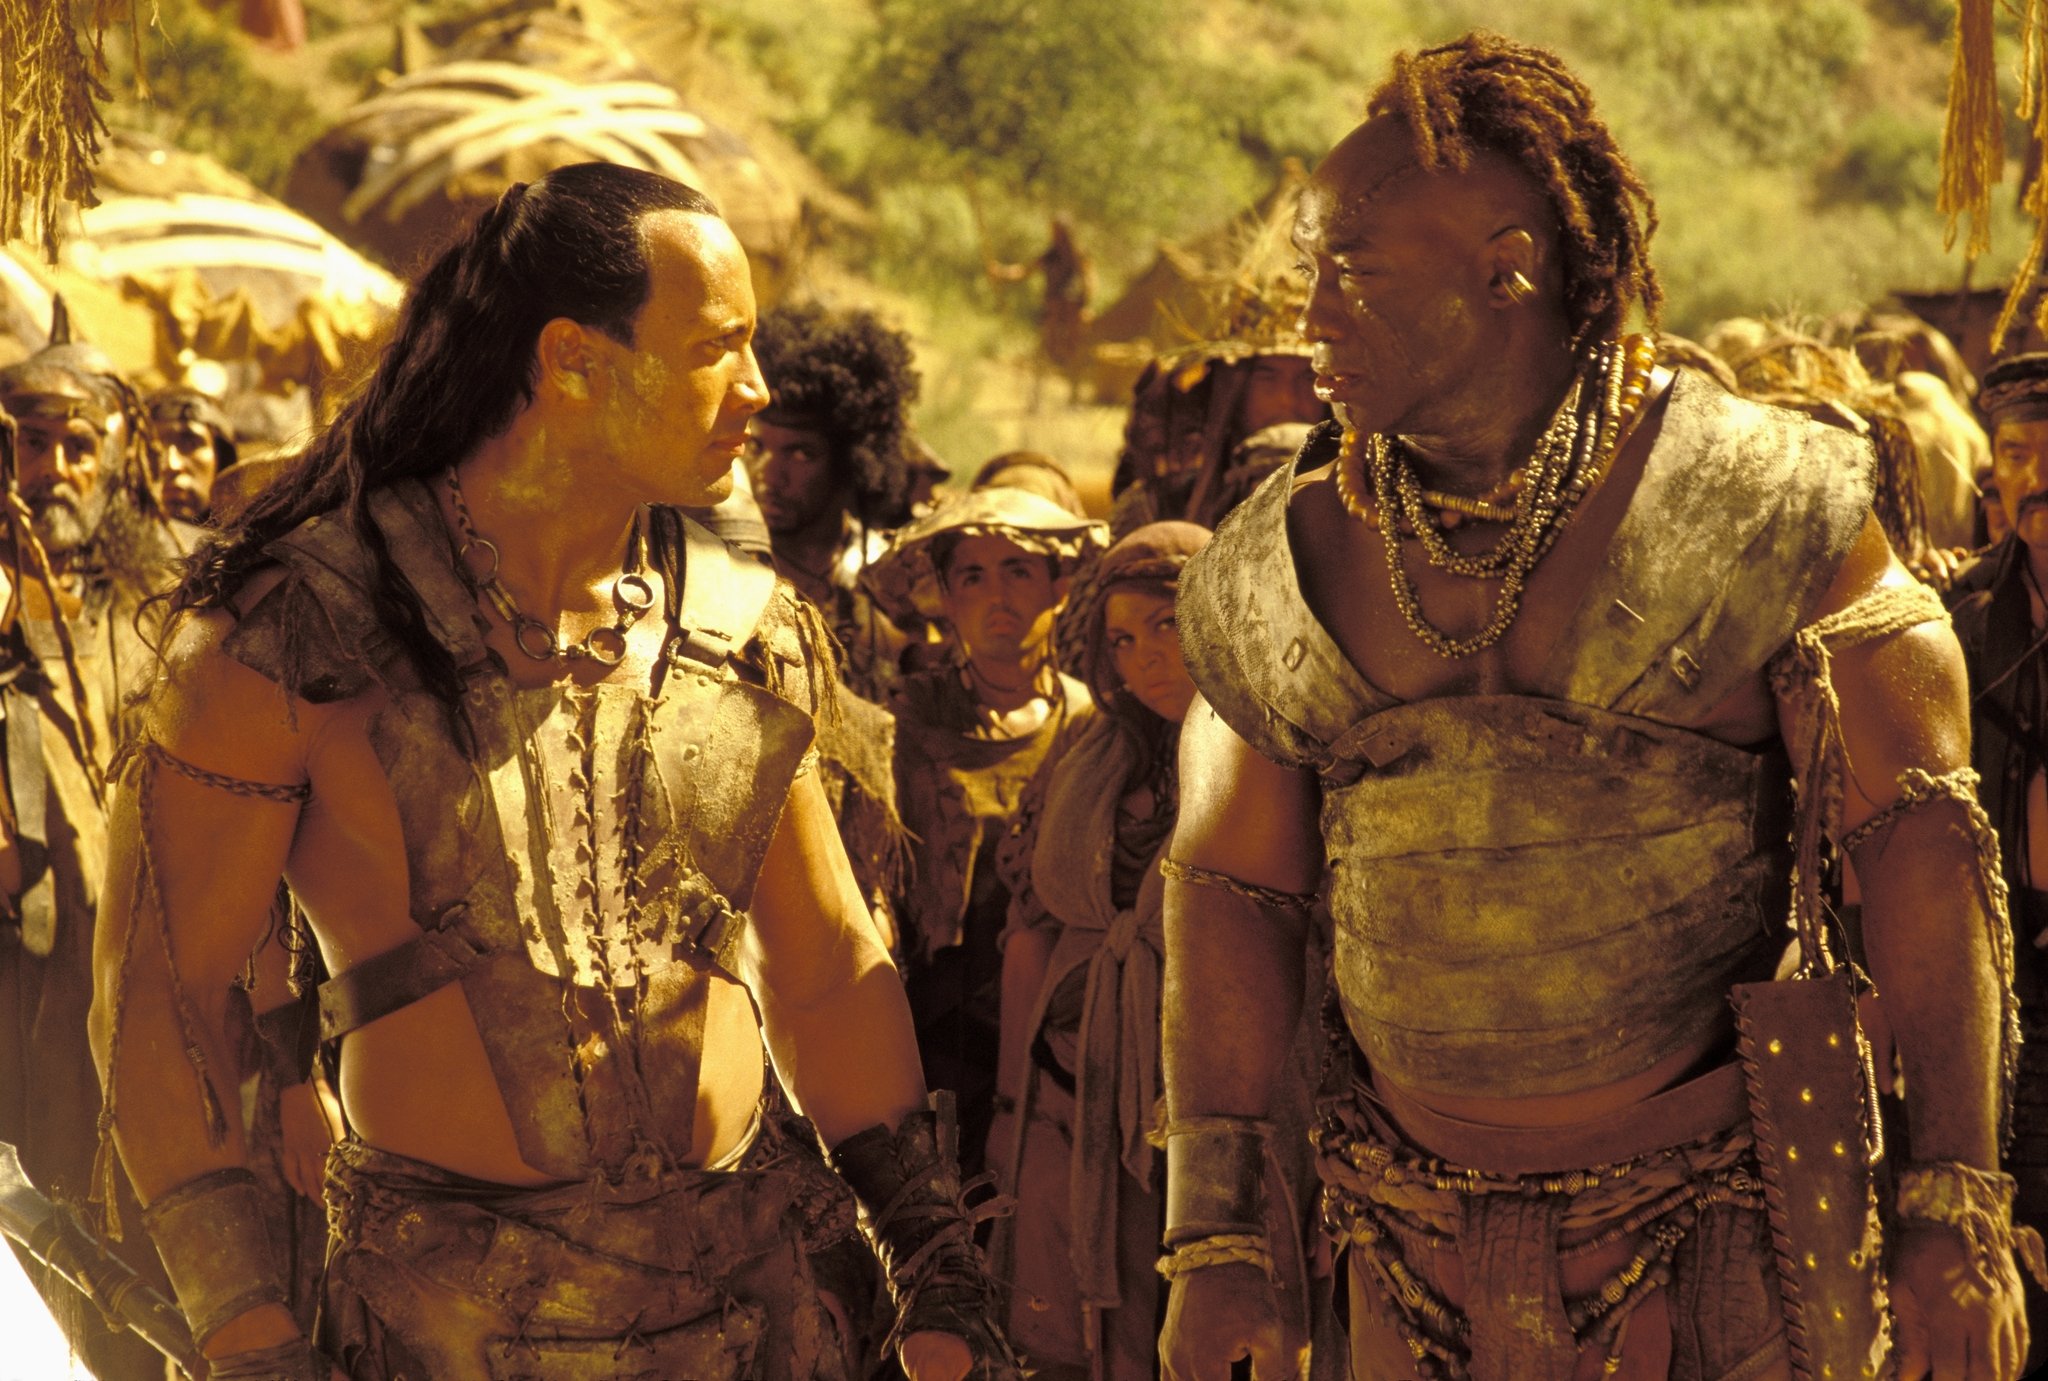 The Scorpion King High Defination HD Wallpapers - All HD Backgrounds